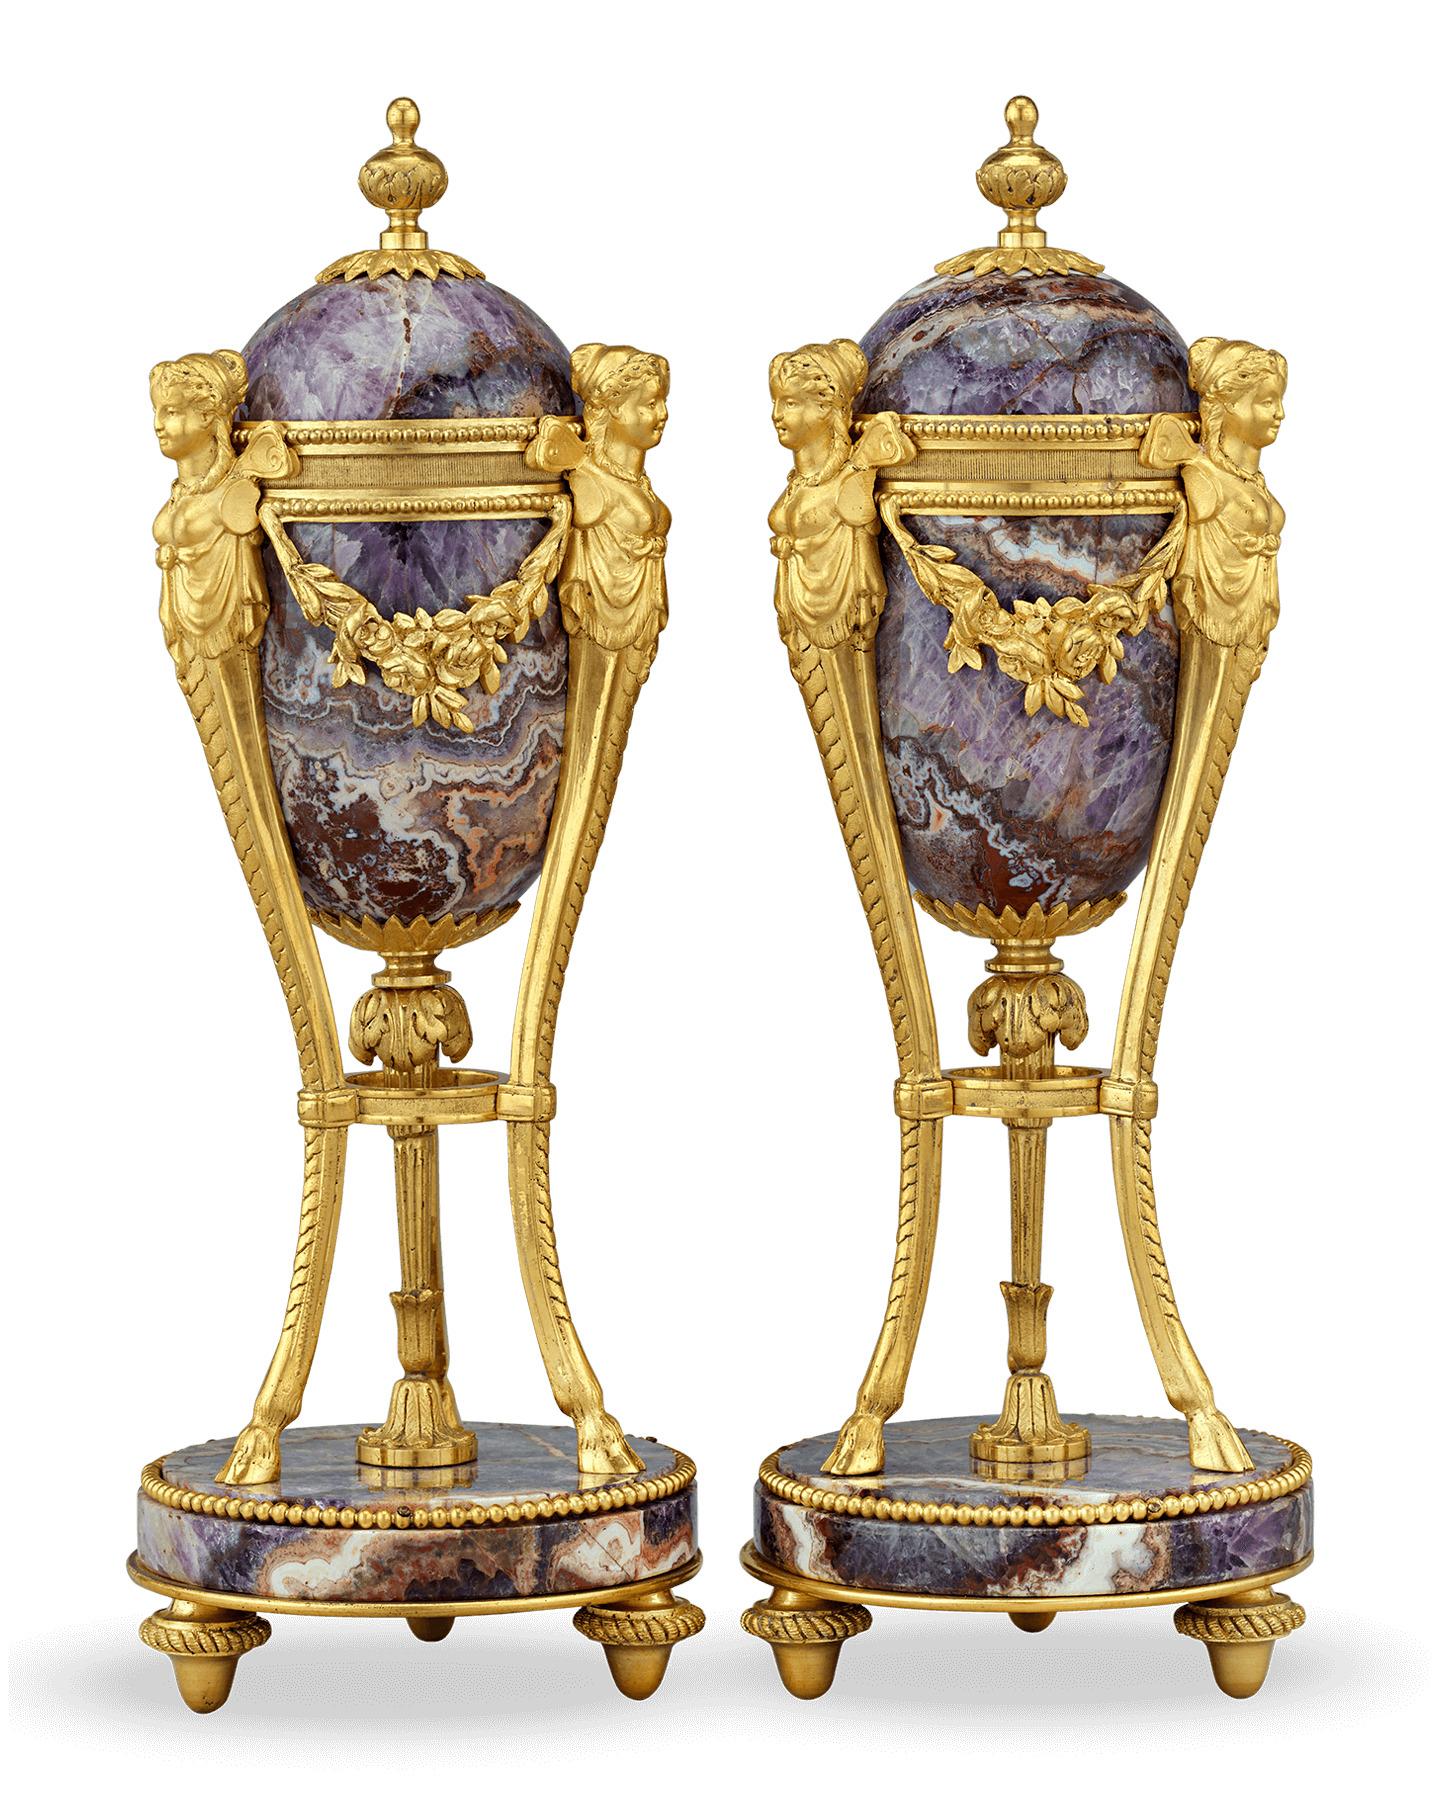 The bodies of this pair of Louis XV style cassolettes are formed from stunning examples of amethyst. Their graceful design showcases the qualities for which this gemstone is so loved, from its radiating crystalline structure to its rich shades of